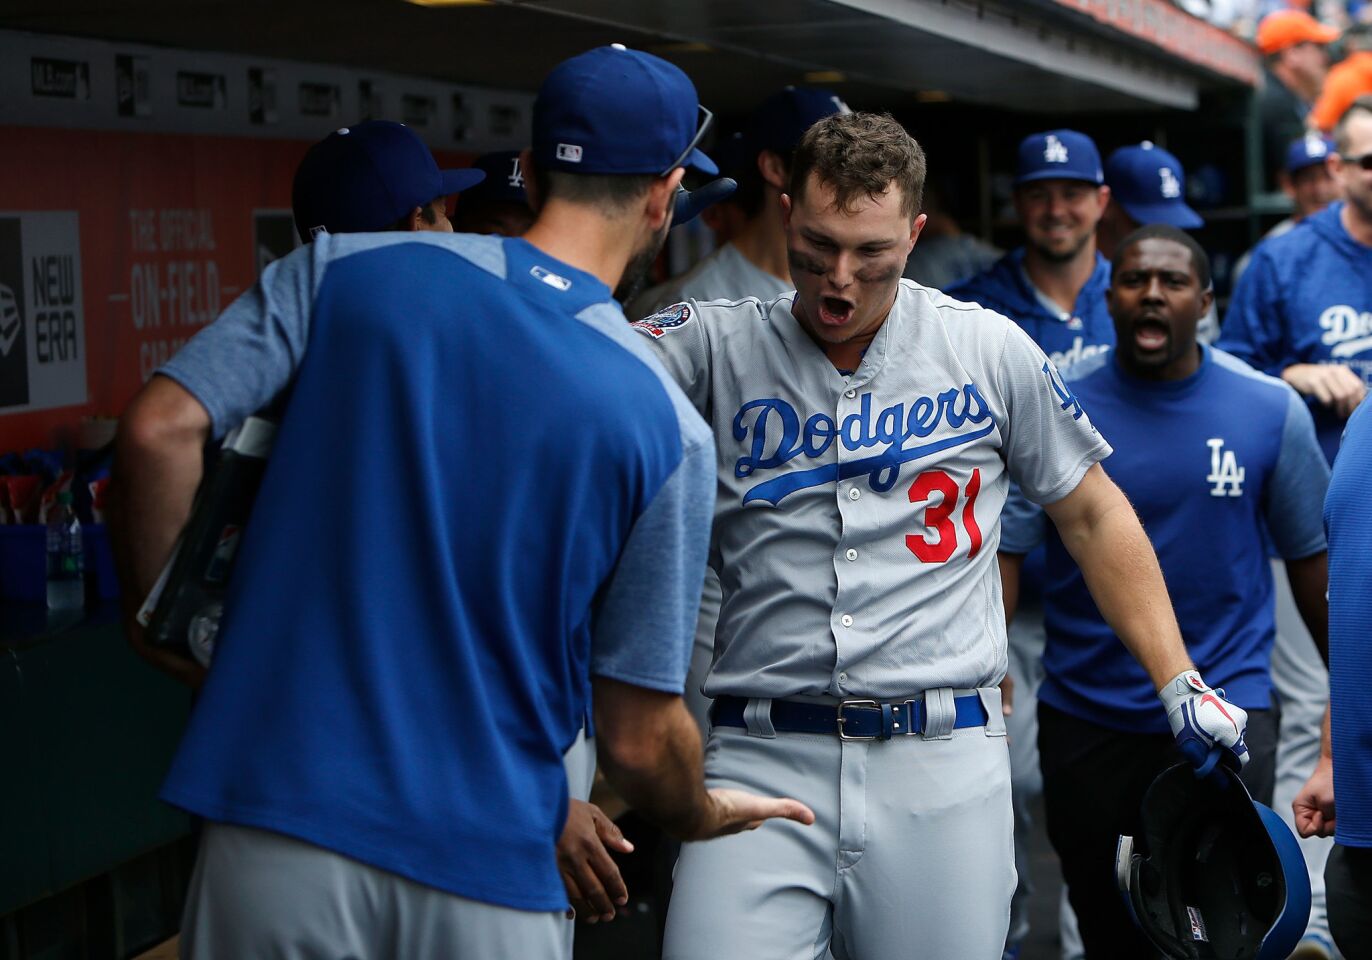 SAN FRANCISCO, CA - SEPTEMBER 29: Joc Pederson #31 of the Los Angeles Dodgers celebrates after hitting a lead-off home run in the top of the first inning against the San Francisco Giants at AT&T Park on September 29, 2018 in San Francisco, California. (Photo by Lachlan Cunningham/Getty Images) ** OUTS - ELSENT, FPG, CM - OUTS * NM, PH, VA if sourced by CT, LA or MoD **